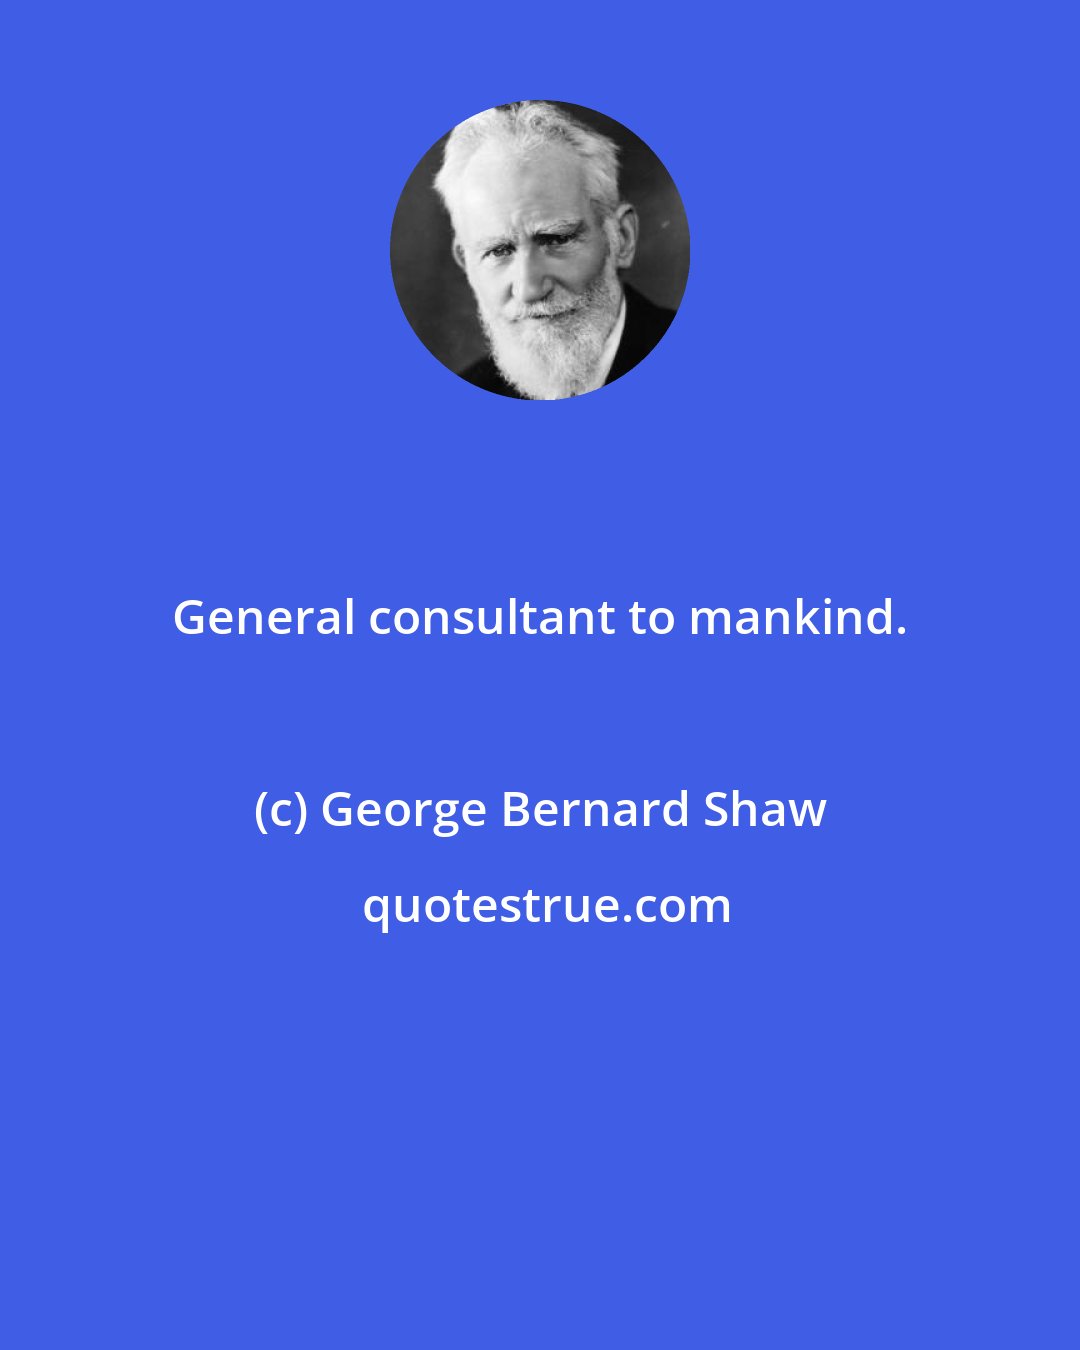 George Bernard Shaw: General consultant to mankind.